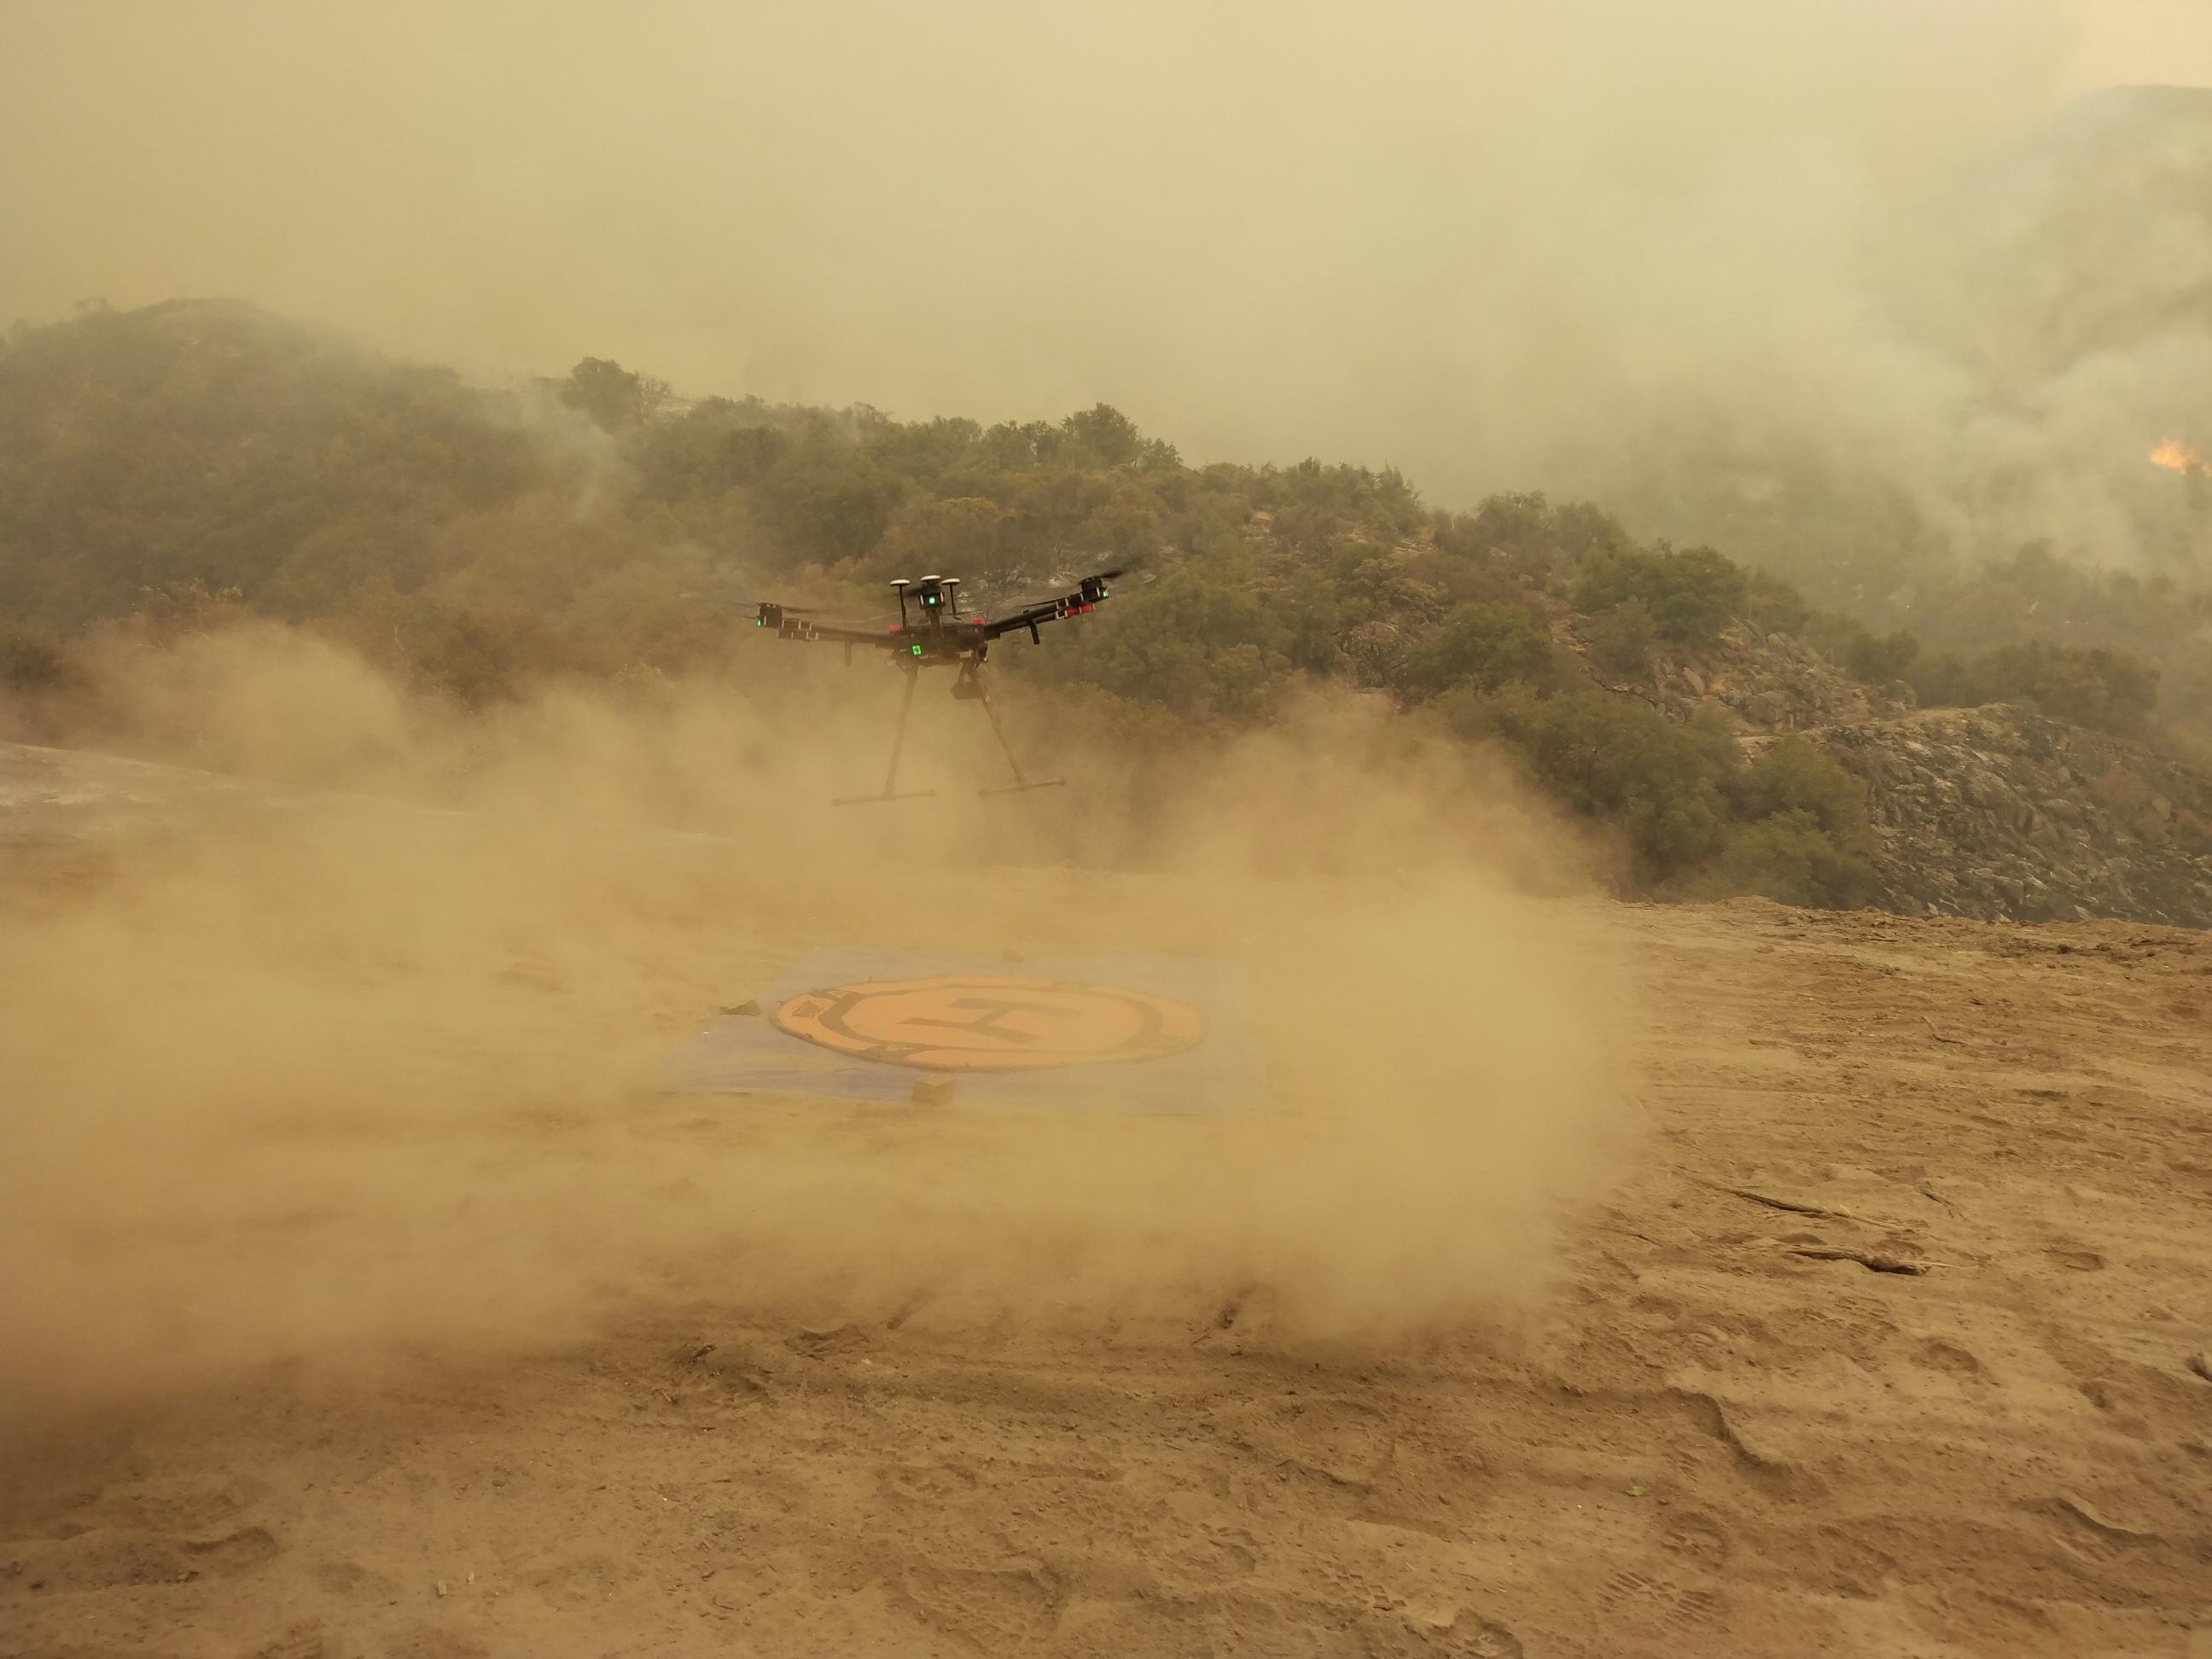 Drone taking off for a mission over a landing pad into a valley with active fire to determine fire edge using infrared photography. Photographer Laid Naylor, US Forest Service